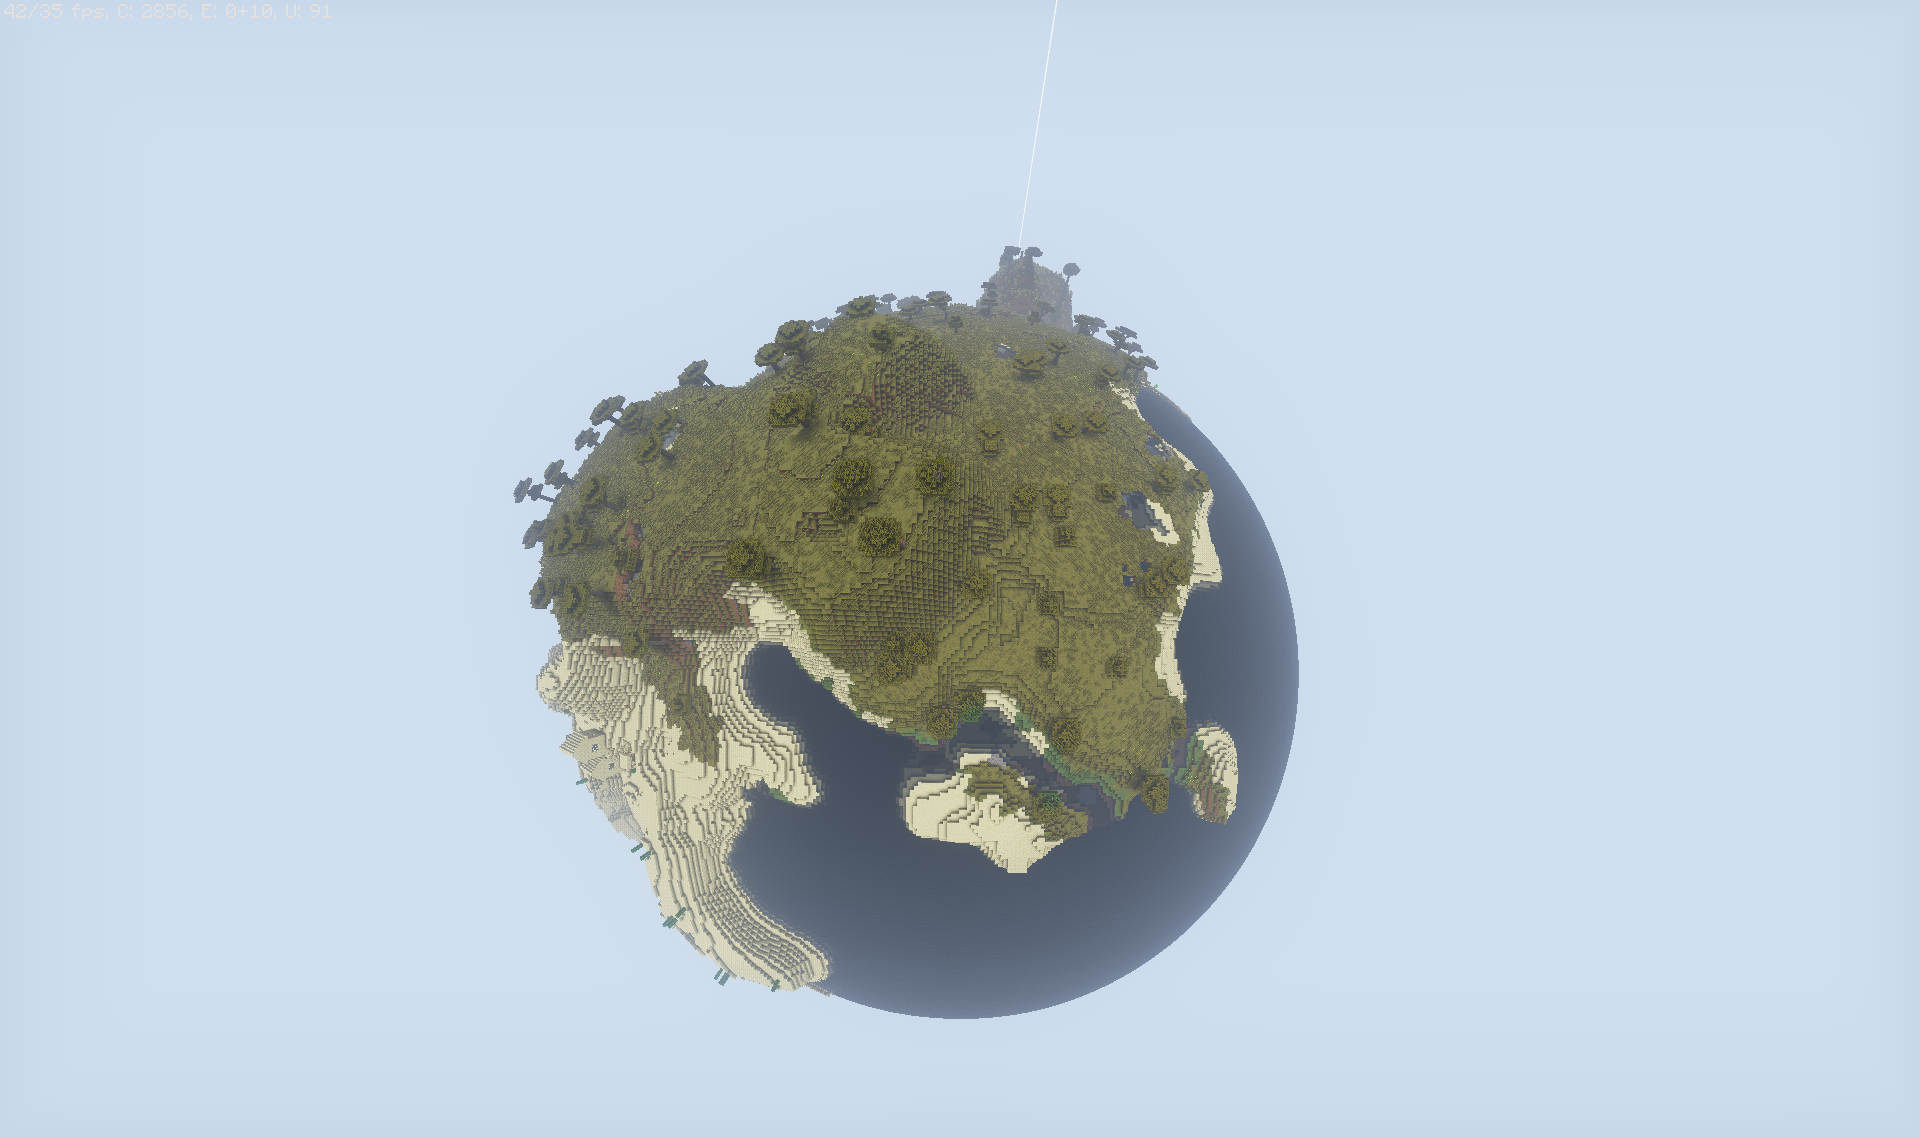 images/2406/14/DrDestens_MCShaders_7.png